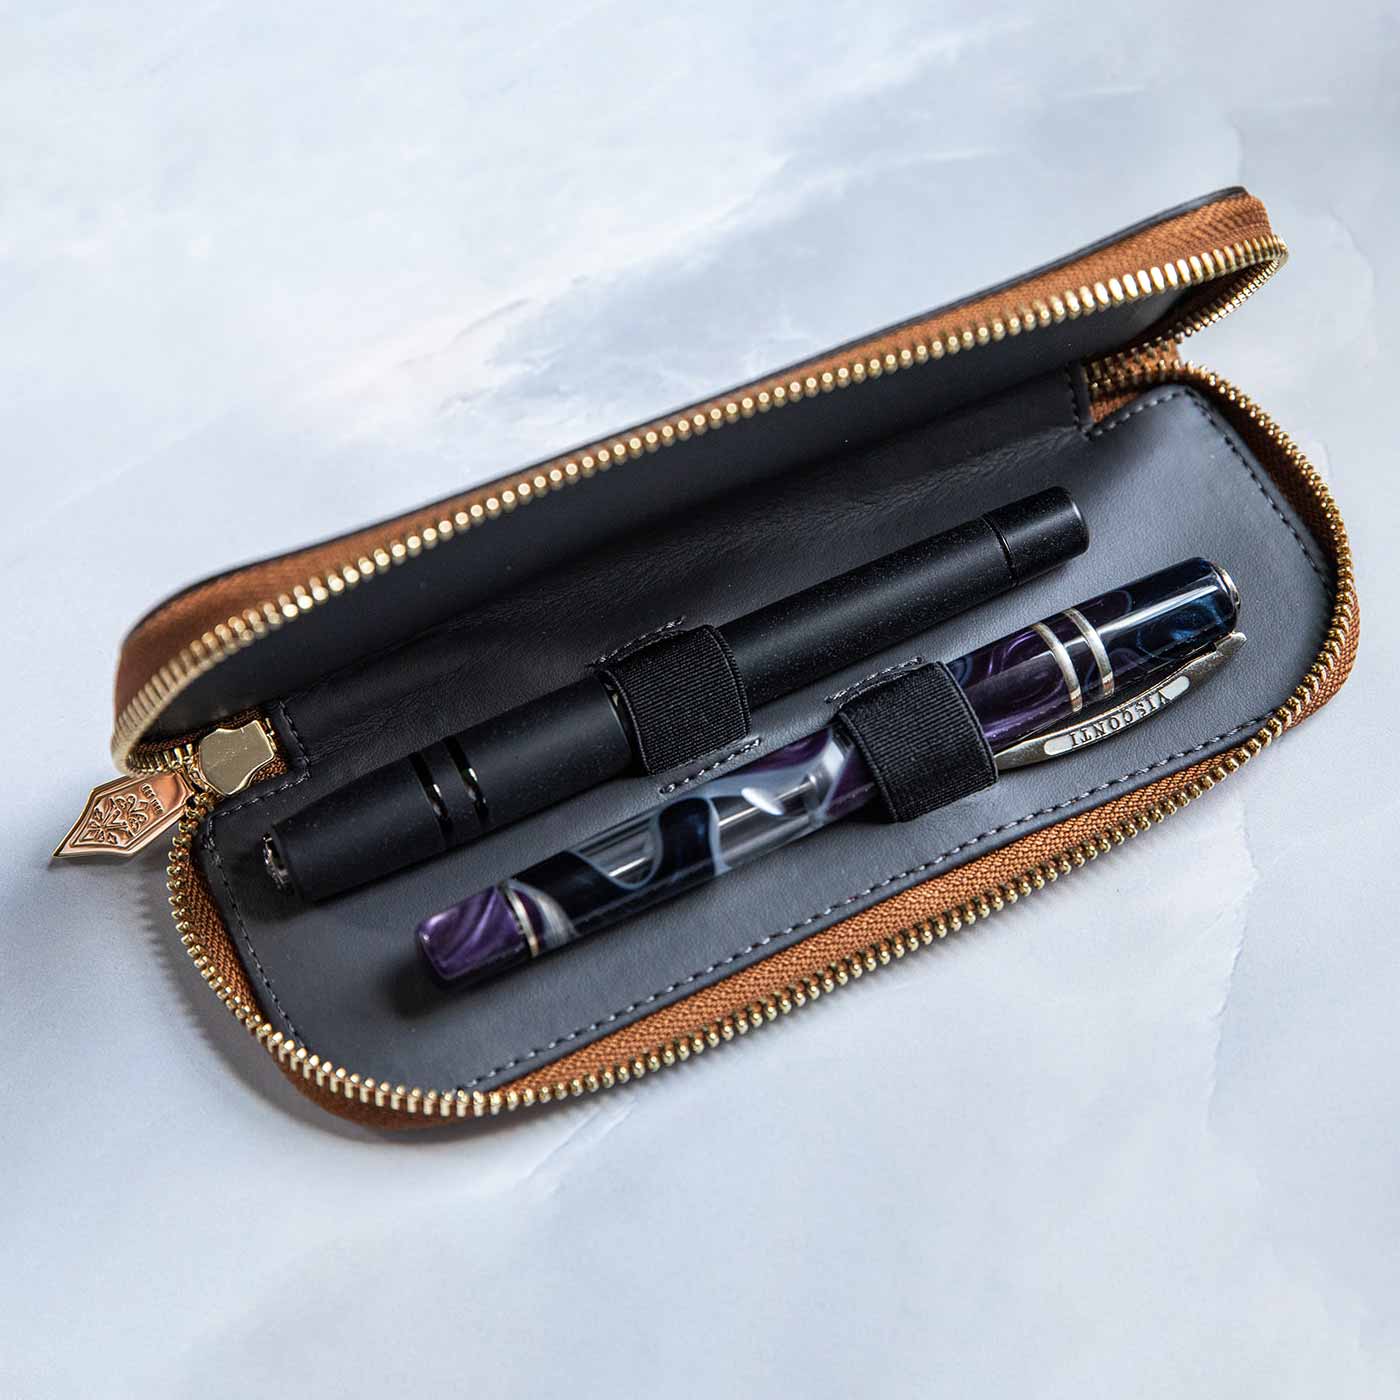 Visconti VSCT Leather Collection – 2 Pen Zippered Case – The Nibsmith